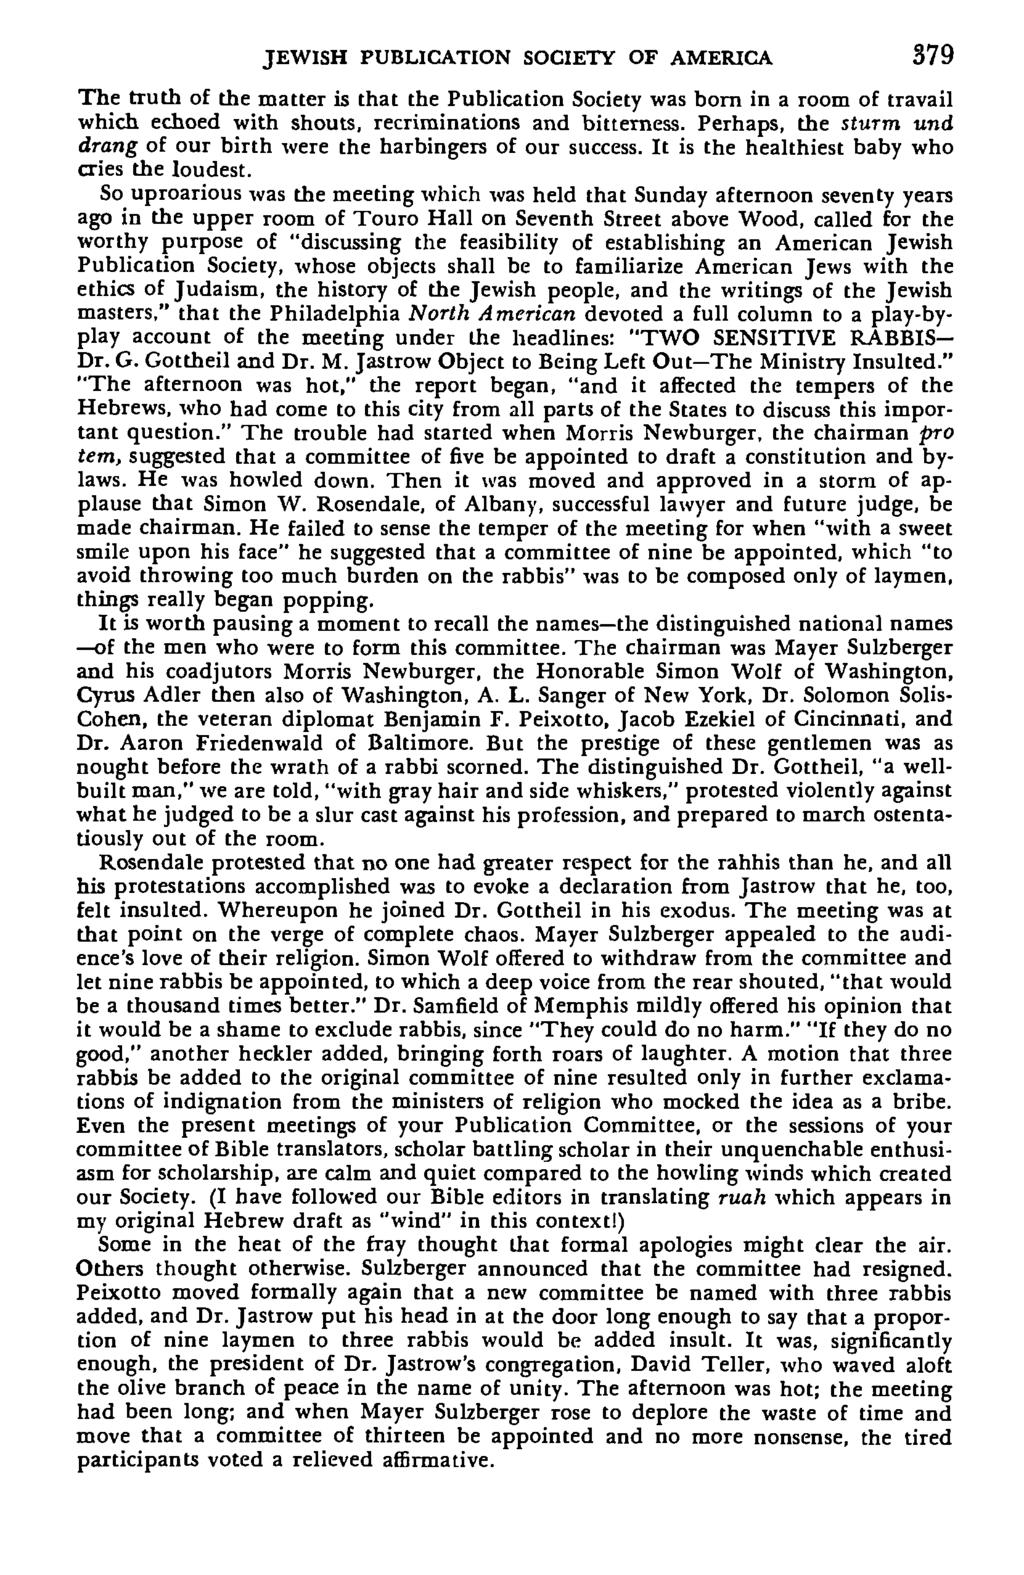 JEWISH PUBLICATION SOCIETY OF AMERICA 379 The truth of the matter is that the Publication Society was born in a room of travail which echoed with shouts, recriminations and bitterness.